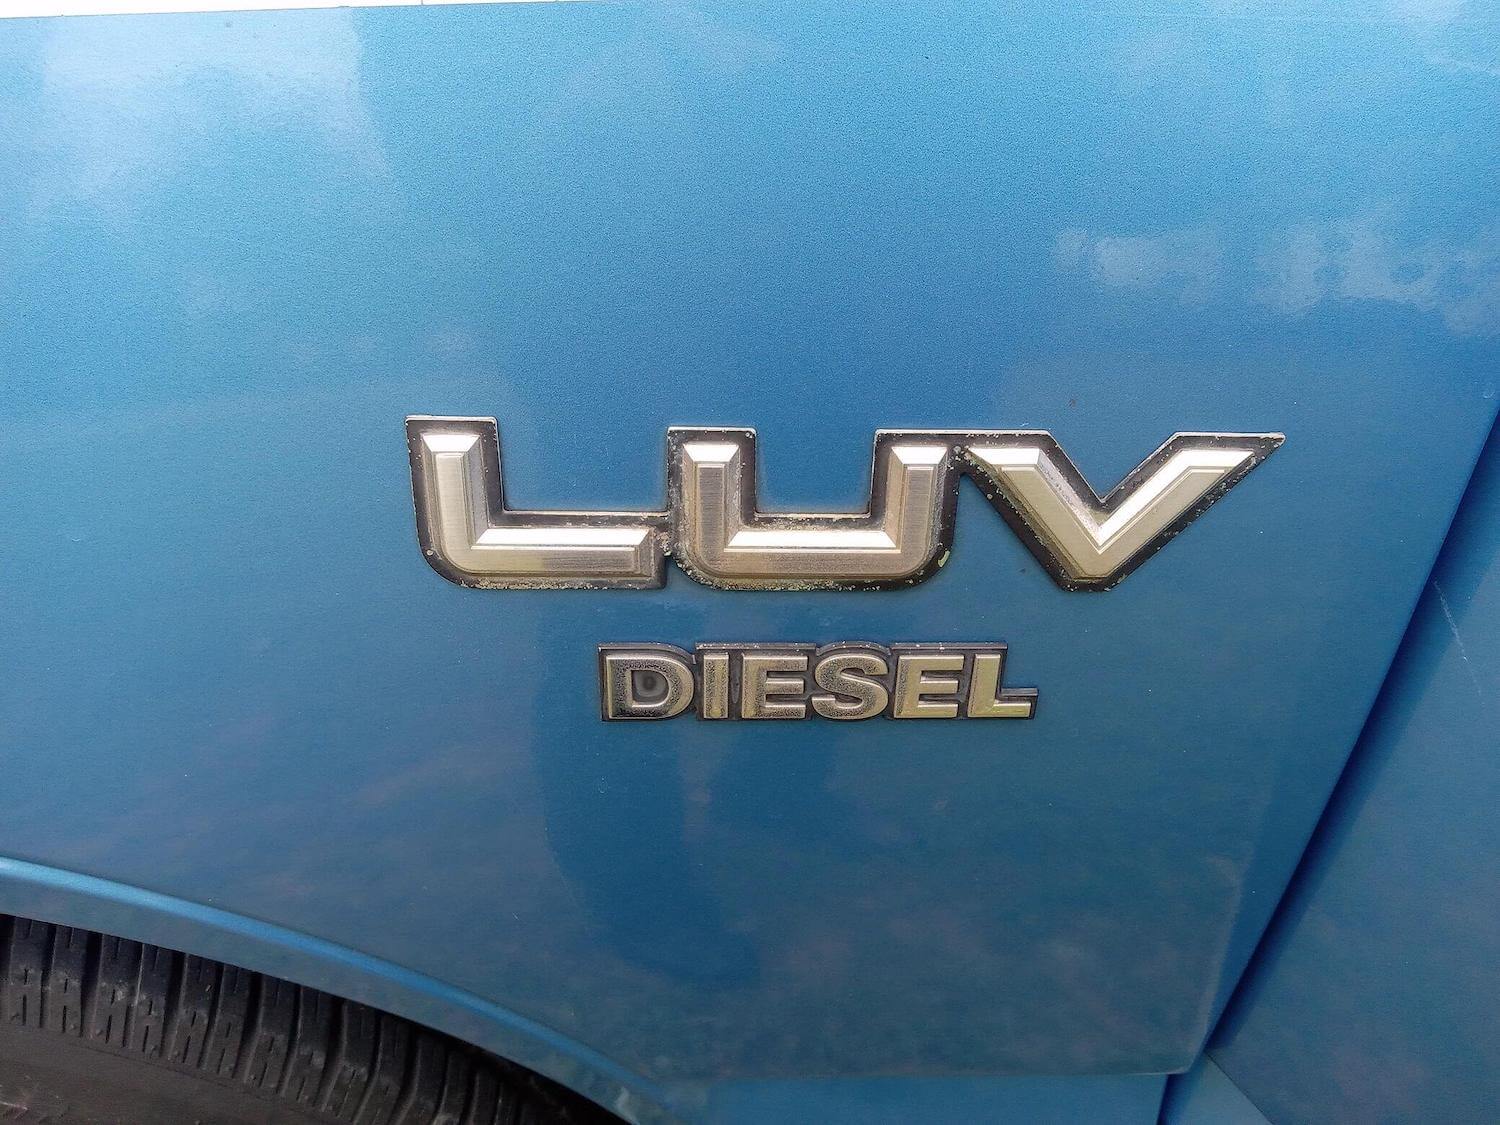 The LUV and Diesel badges on the blue front fender of a compact Chevrolet pickup truck built by Isuzu for 1982.